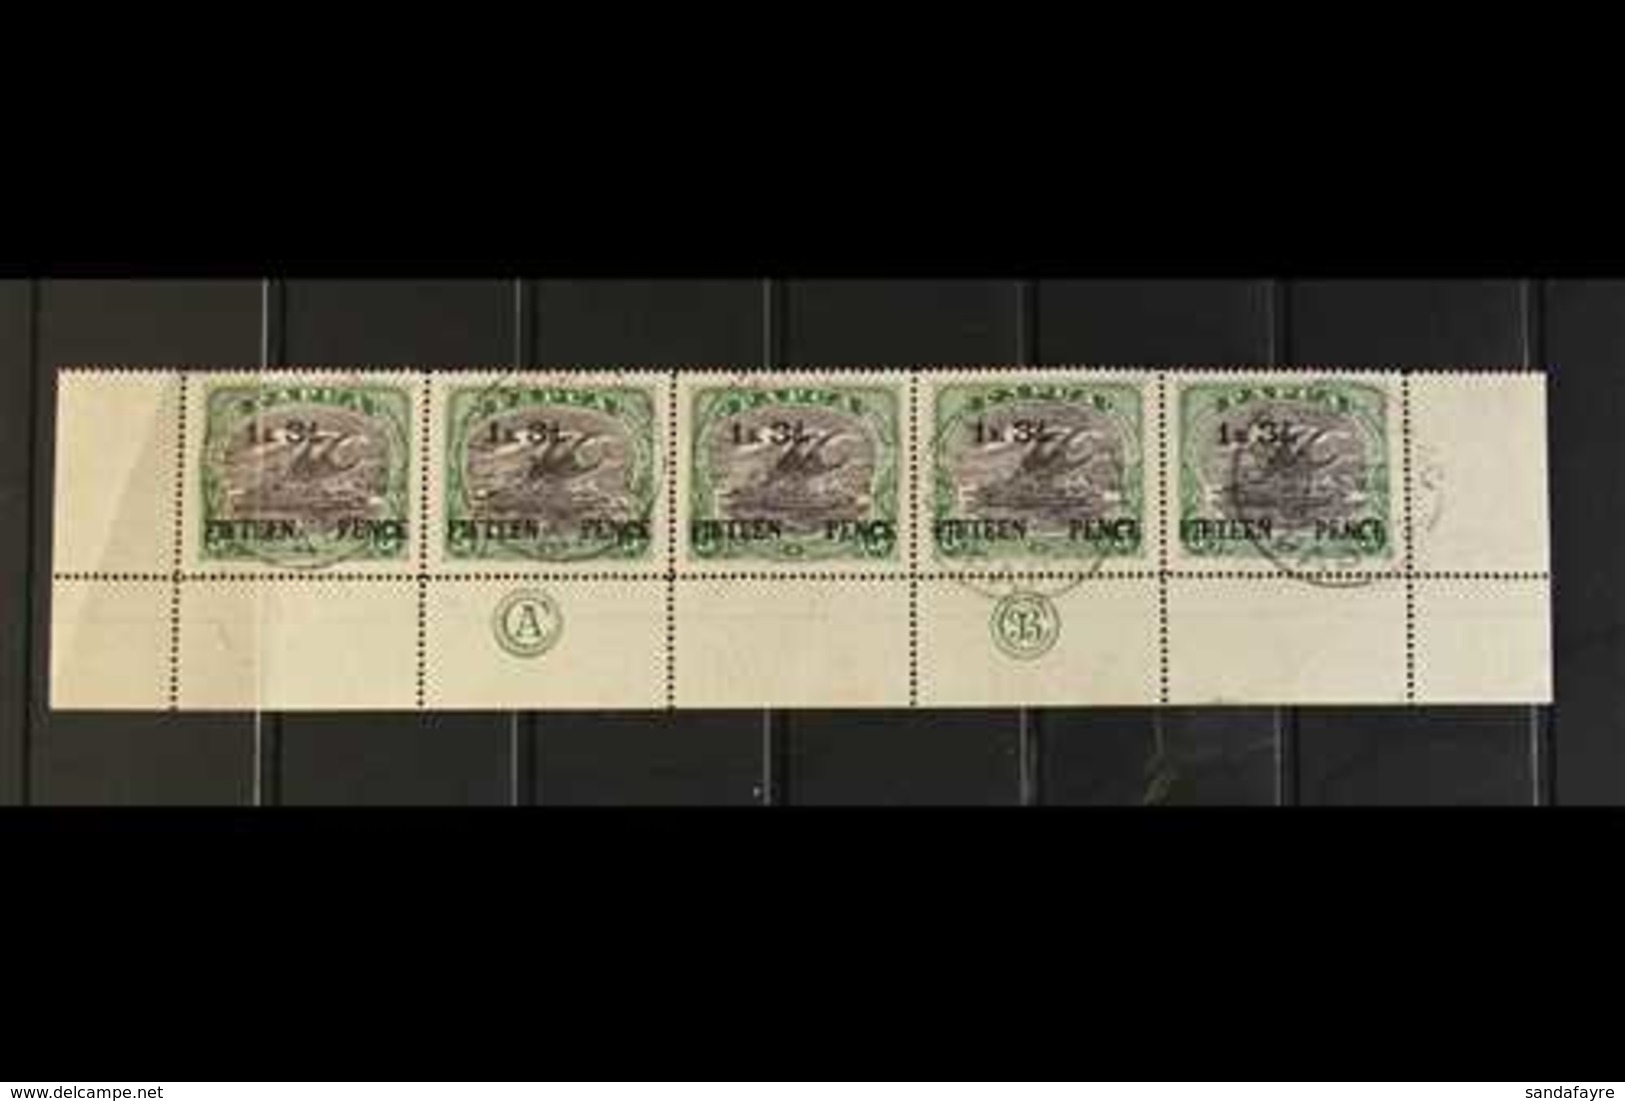 1931 1s3d On 5s Black And Deep Green, SG 123, Complete Lower Row Of The Sheet Showing JBC Imprint, Fine Port Moresby Cds - Papúa Nueva Guinea